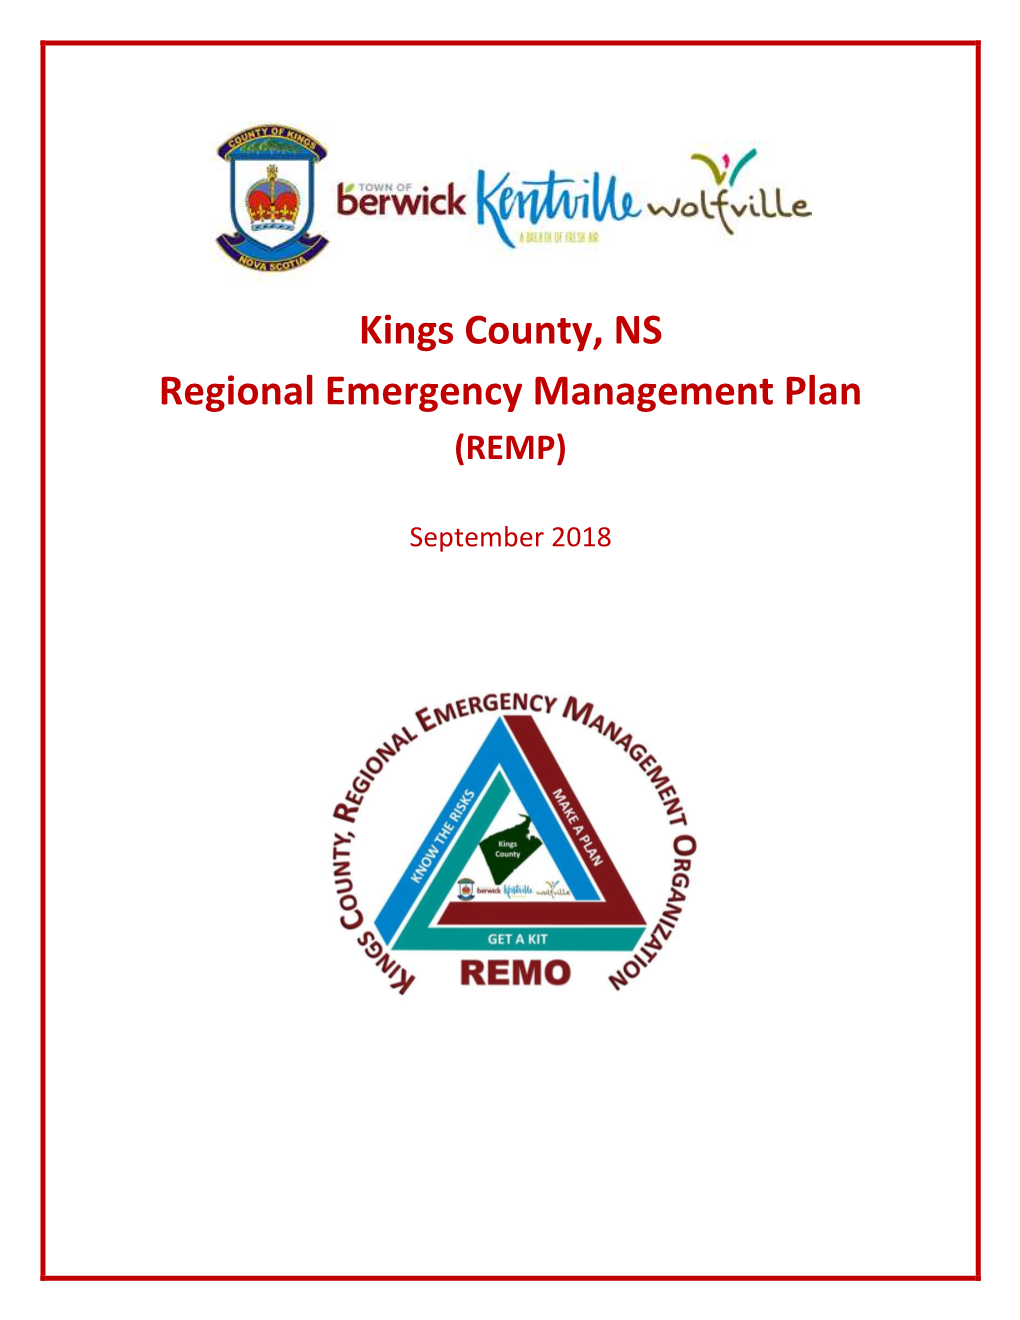 Kings County, NS Regional Emergency Management Plan (REMP)